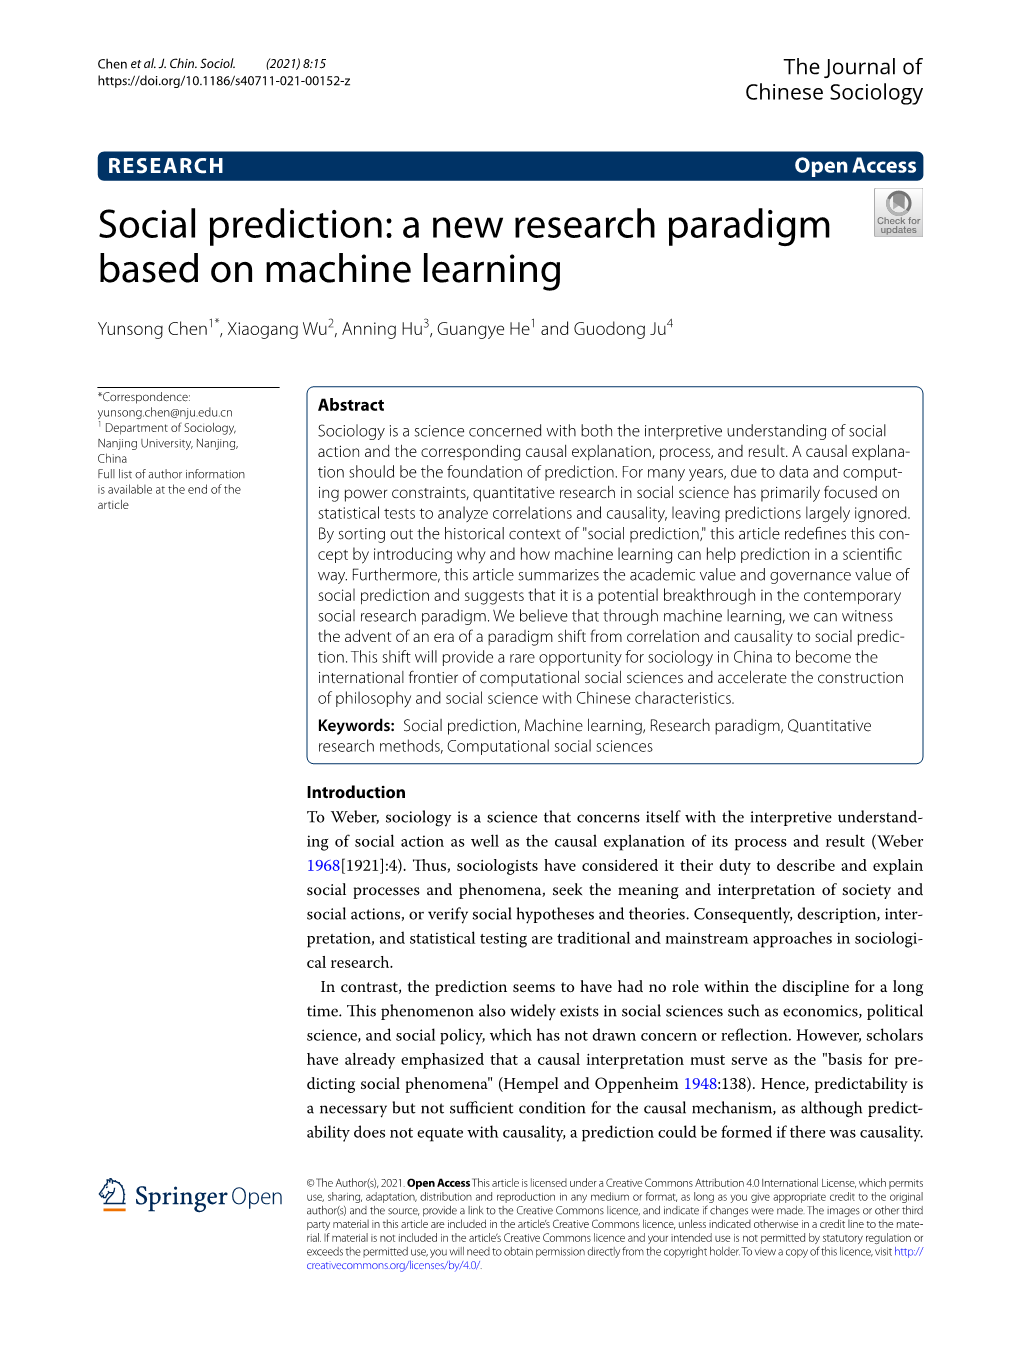 Social Prediction: a New Research Paradigm Based on Machine Learning